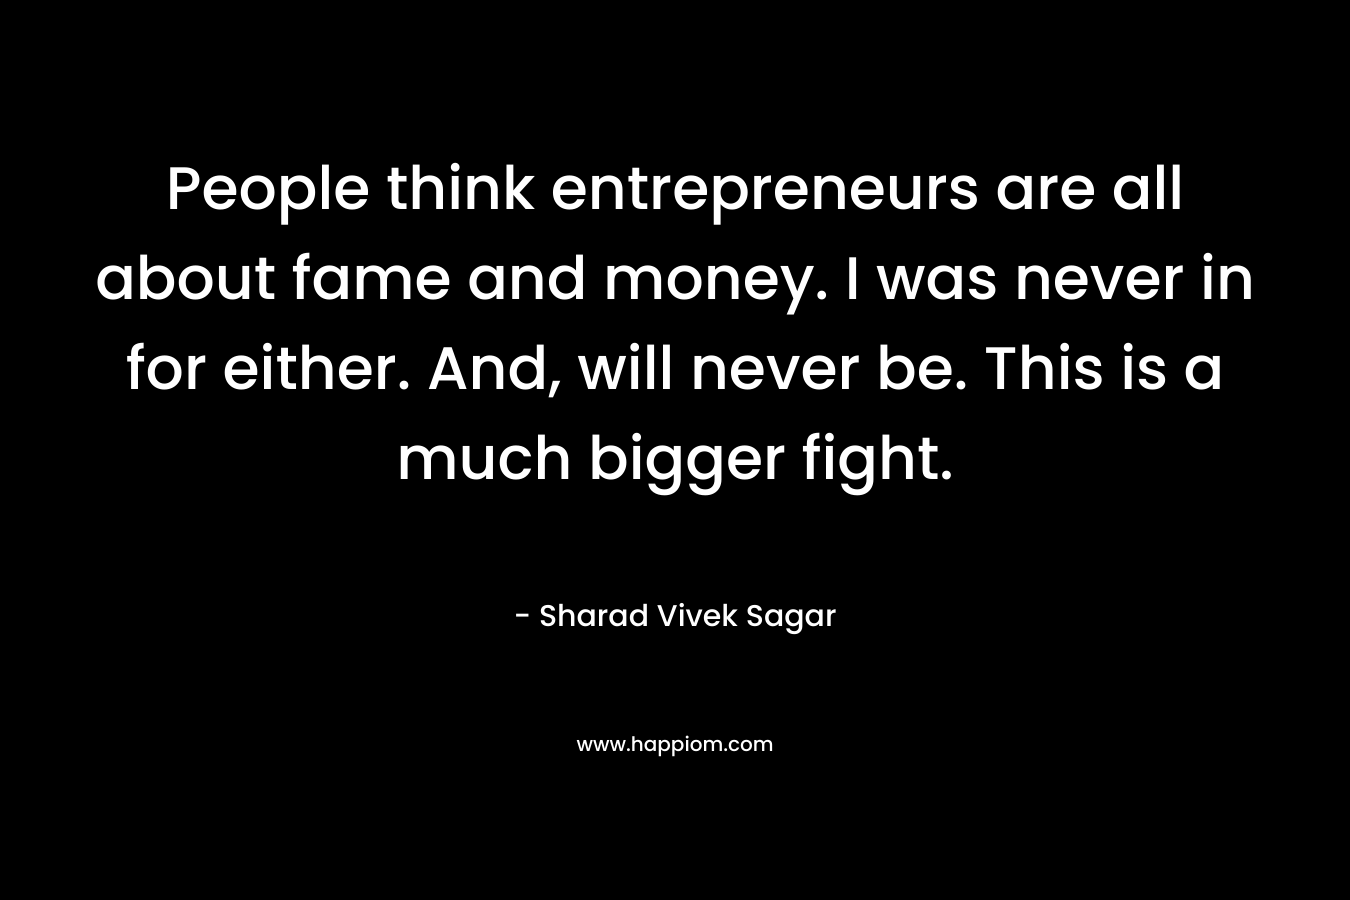 People think entrepreneurs are all about fame and money. I was never in for either. And, will never be. This is a much bigger fight. – Sharad Vivek Sagar